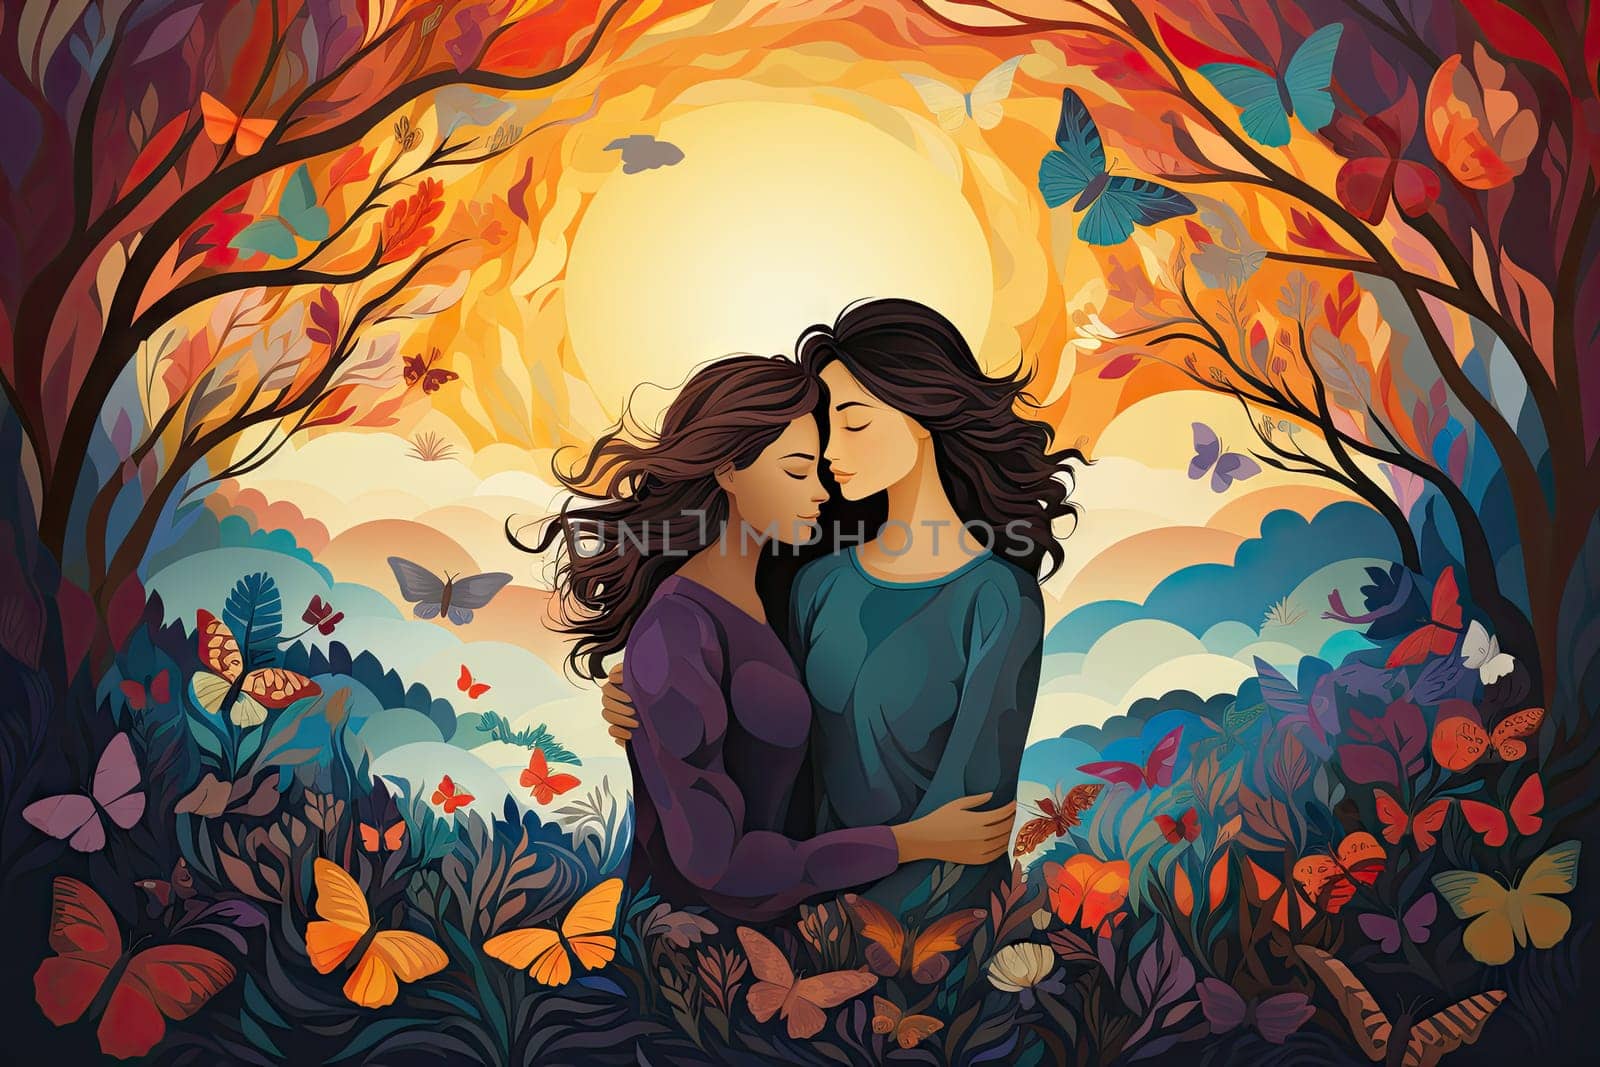 Embrace International Women's Day of Justice 2024, ideas of sisterhood and girl power. woman hugging herself Women's banner March 8, embrace equality. women's empowerment movement.by Generative AI.